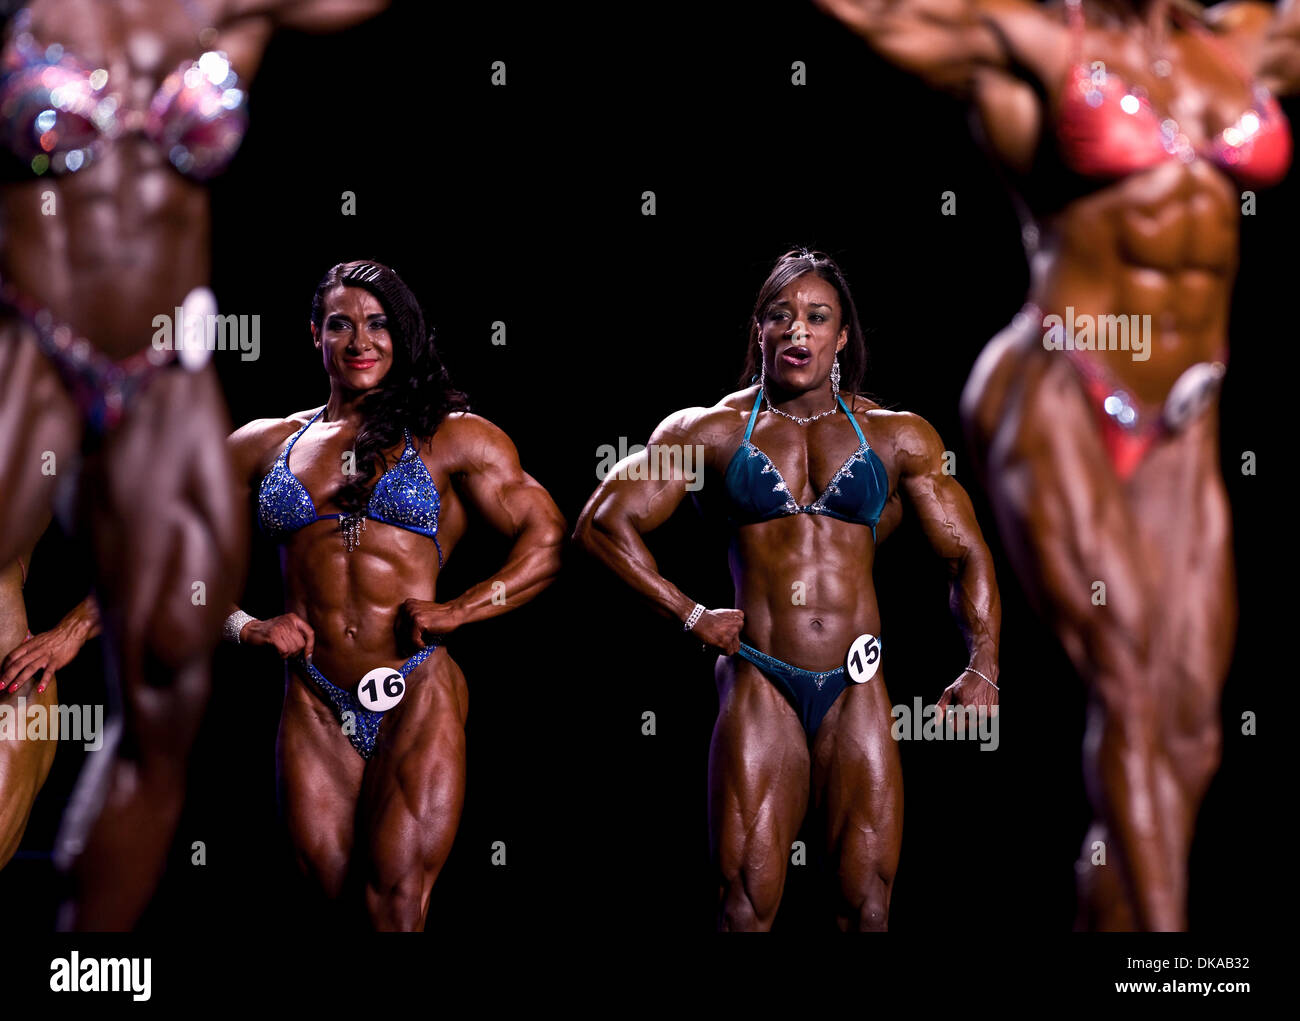 2011 Ms. Olympia / Figure Olympia (Download)